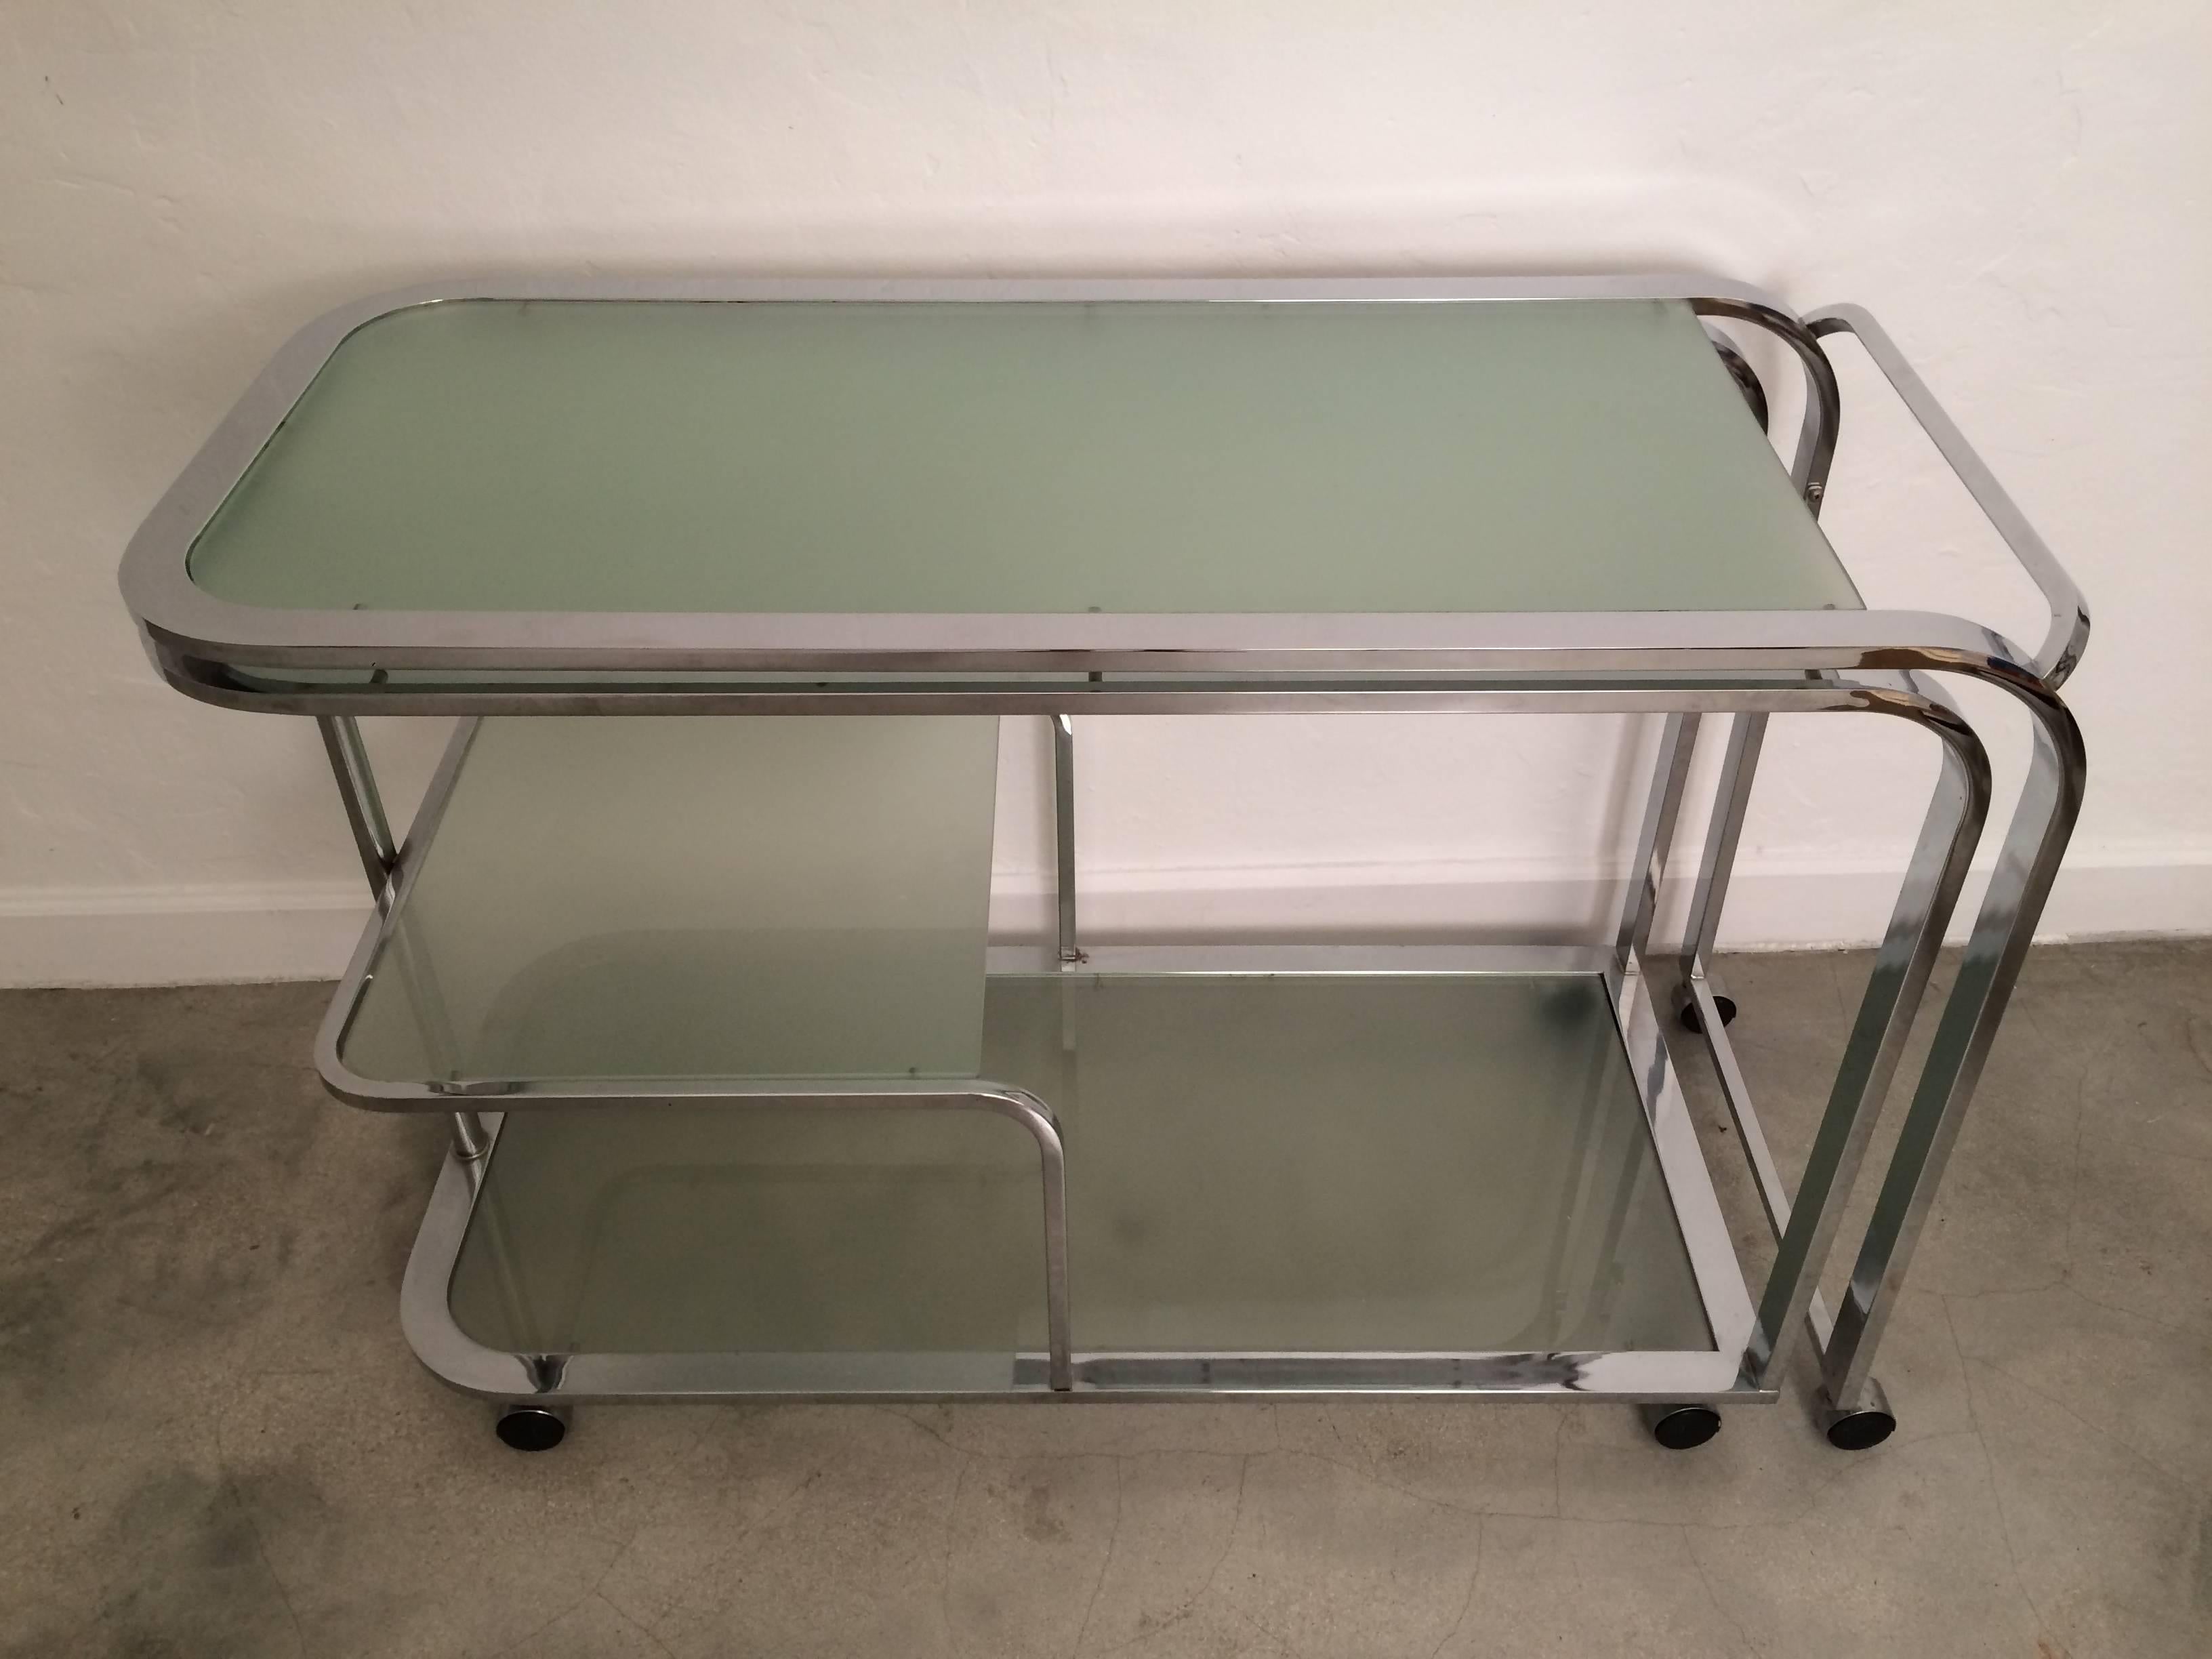 Polished chrome and green glass swivel bar cart or writing table desk by Design Institute of America. Cart expands to 87